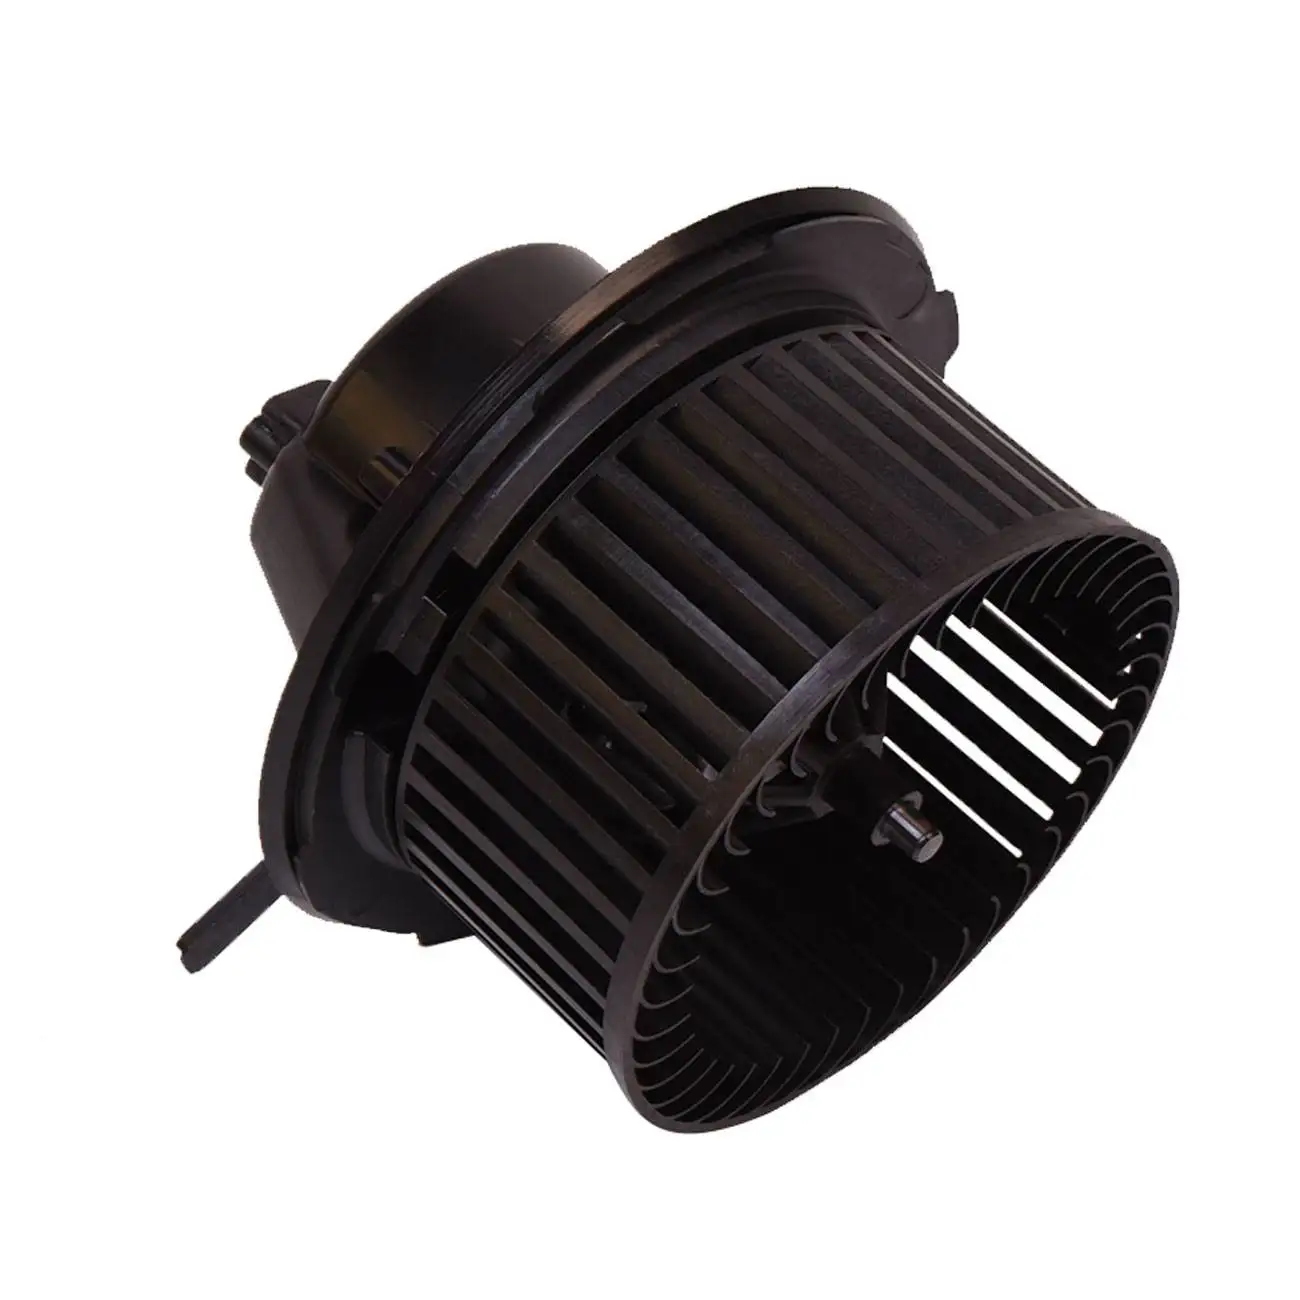 Wholesale Free shipping New AC Heater Blower Motor w/ Fan Cage fits Audi A3  Q3 TT Quattro VW Beetle Golf From